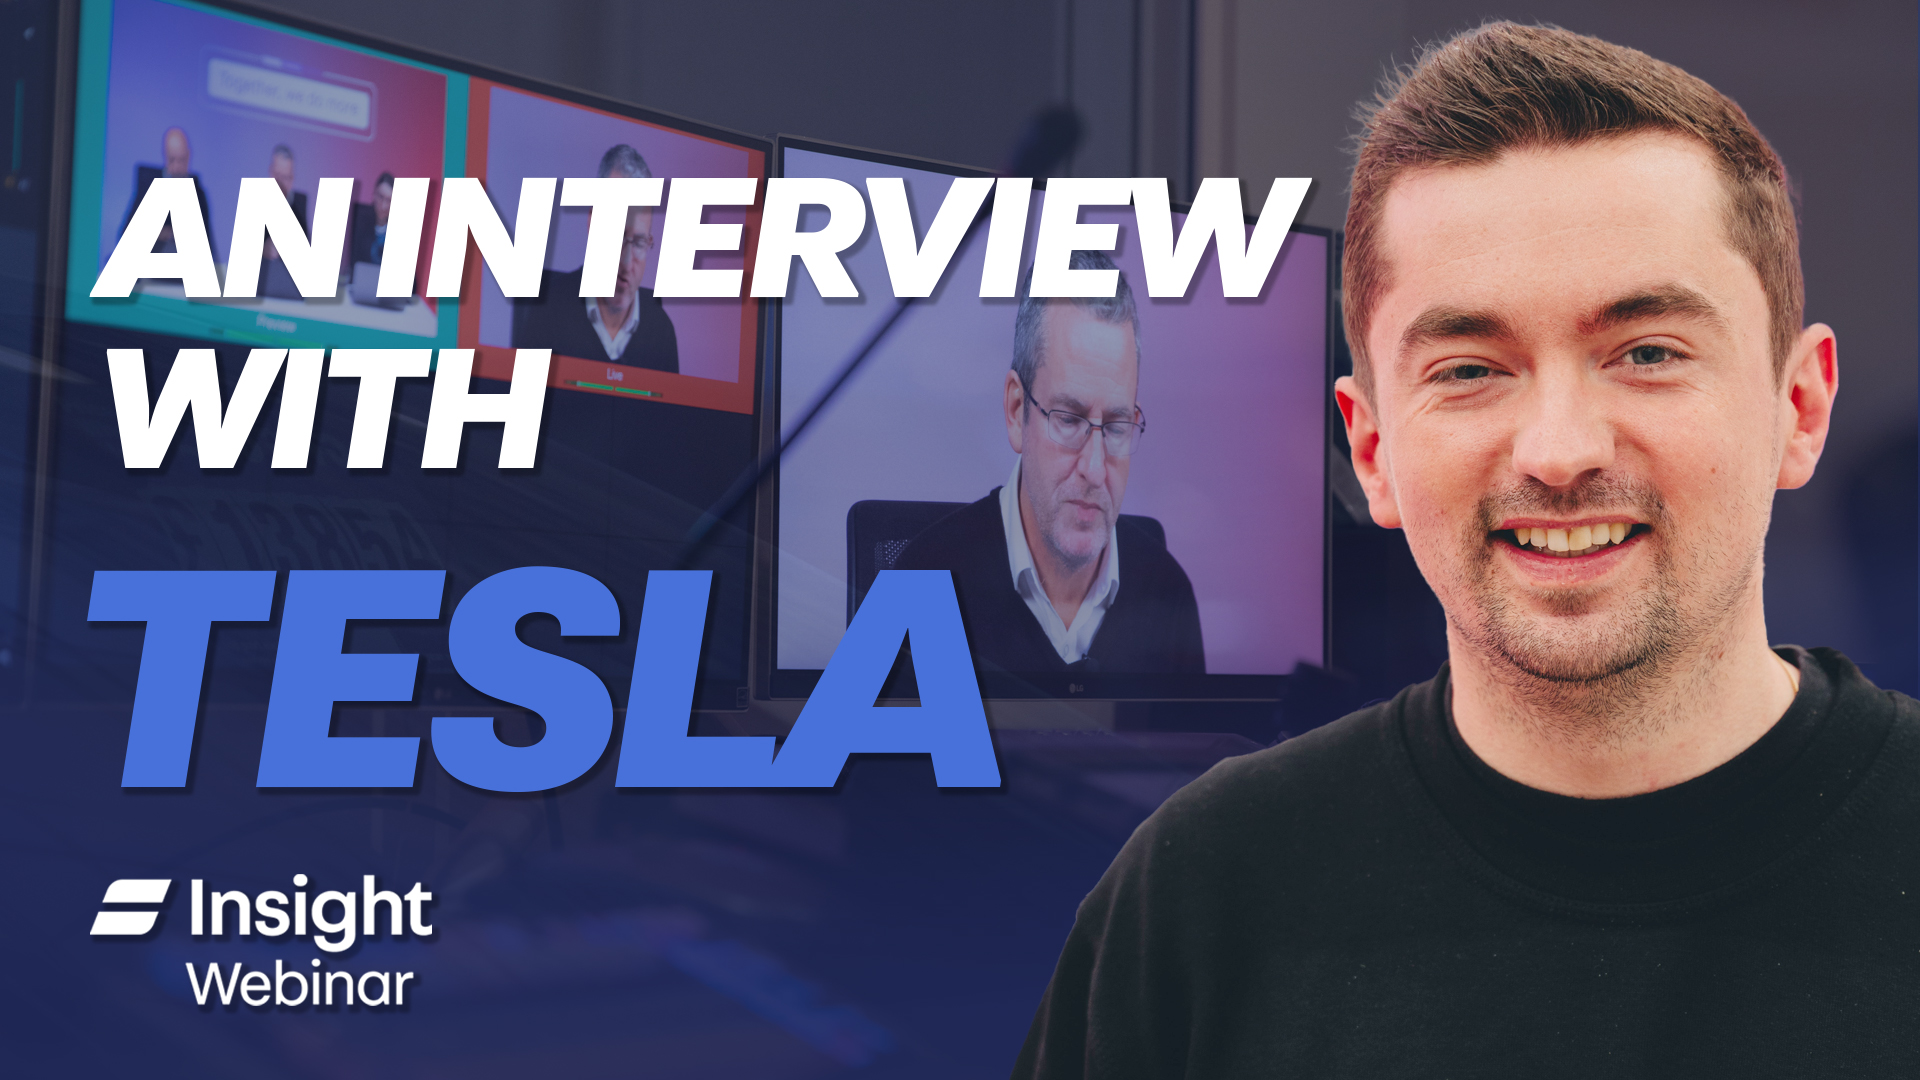 An interview with Tesla